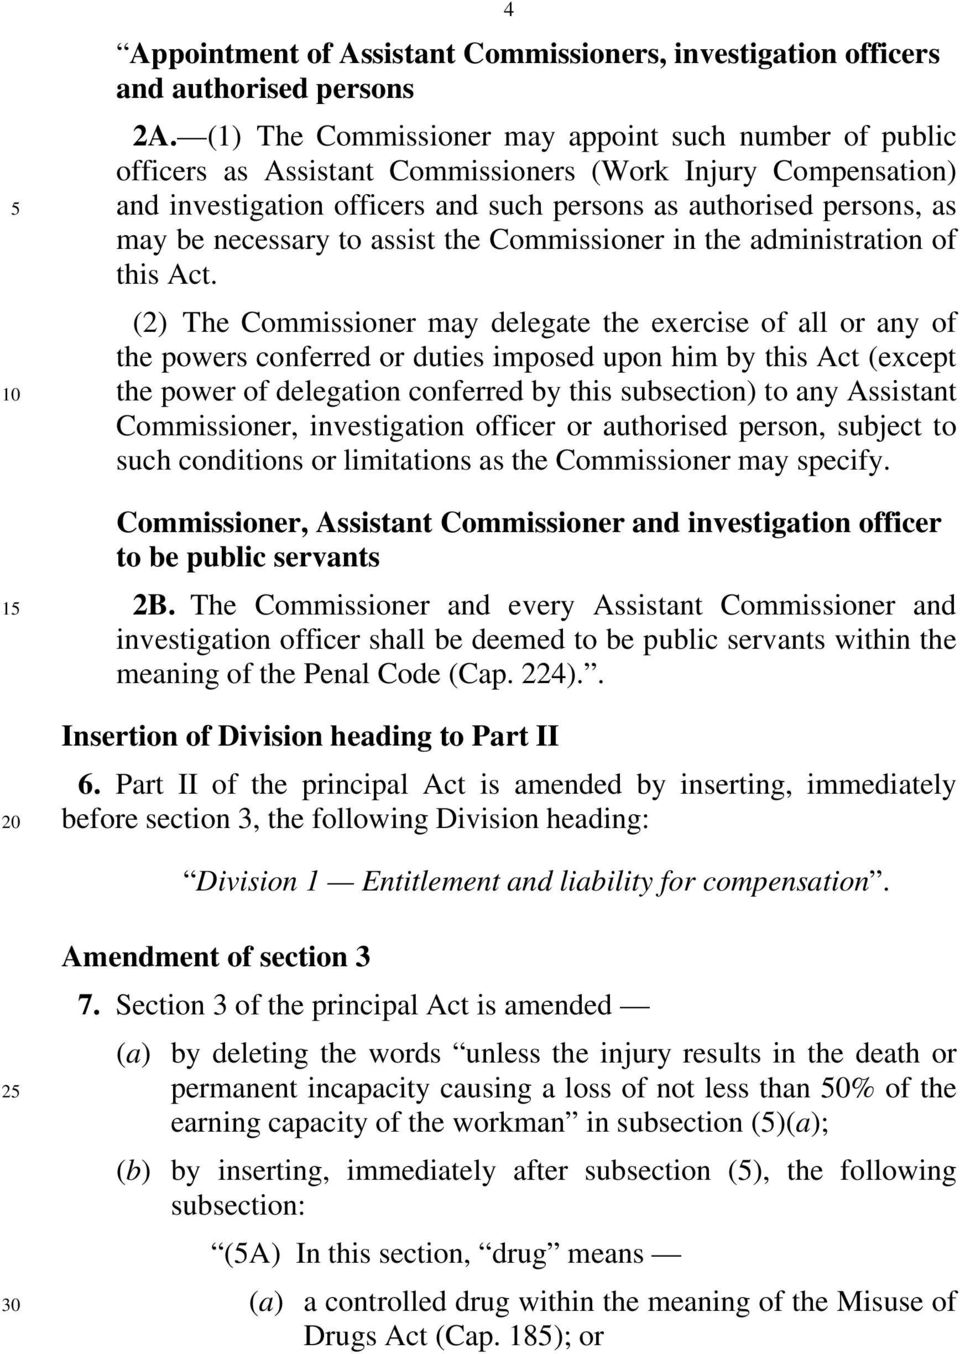 necessary to assist the Commissioner in the administration of this Act.